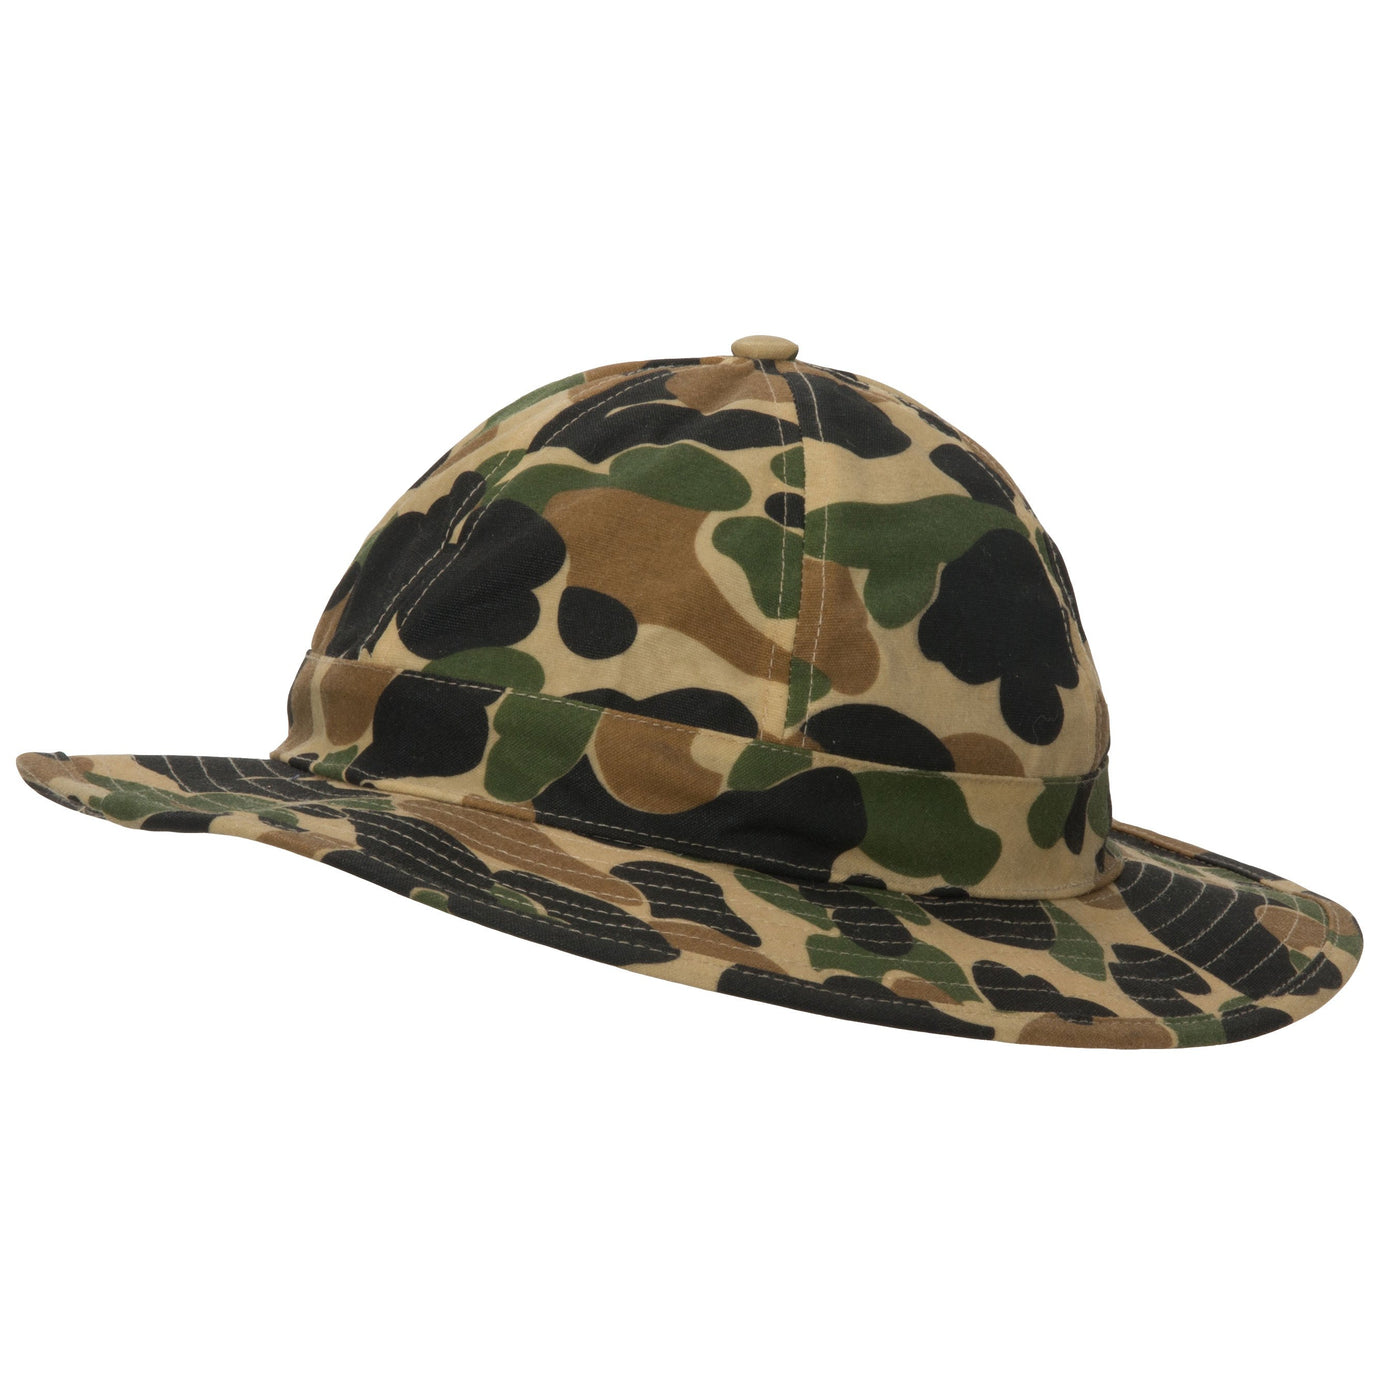 Avery Heritage Boonie Hat-Men's Accessories-Old School Camo-L-Kevin's Fine Outdoor Gear & Apparel